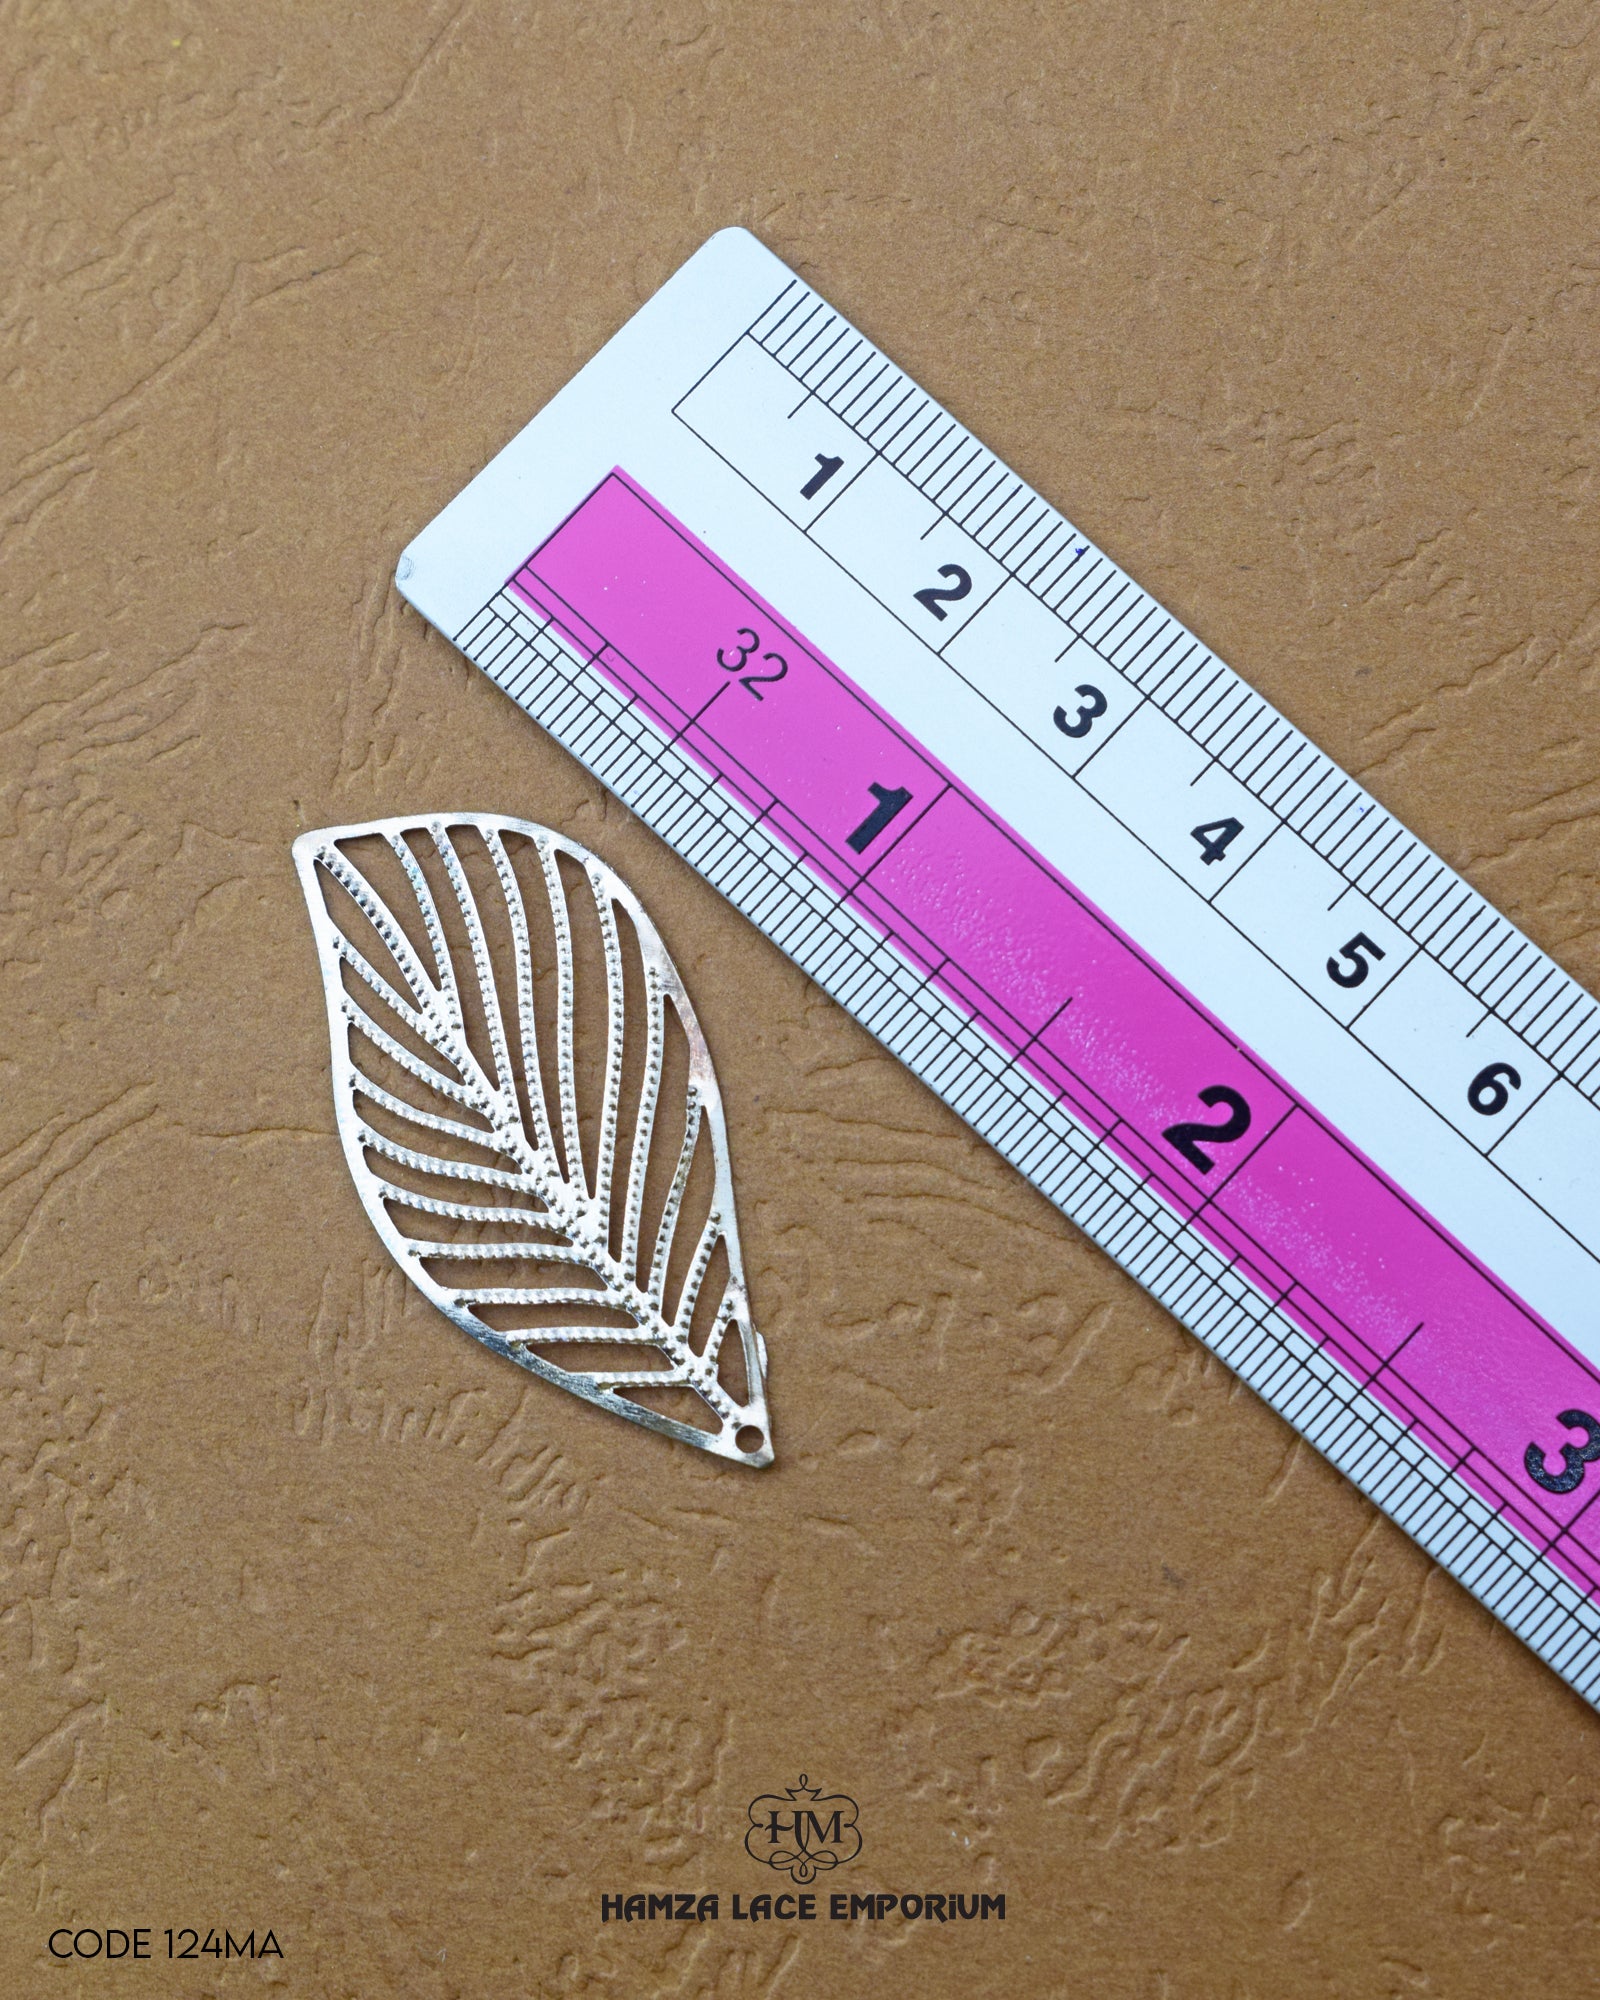 The 'Leaf Design Metal Accessory MA124' size is showcased using a ruler for precise measurement.